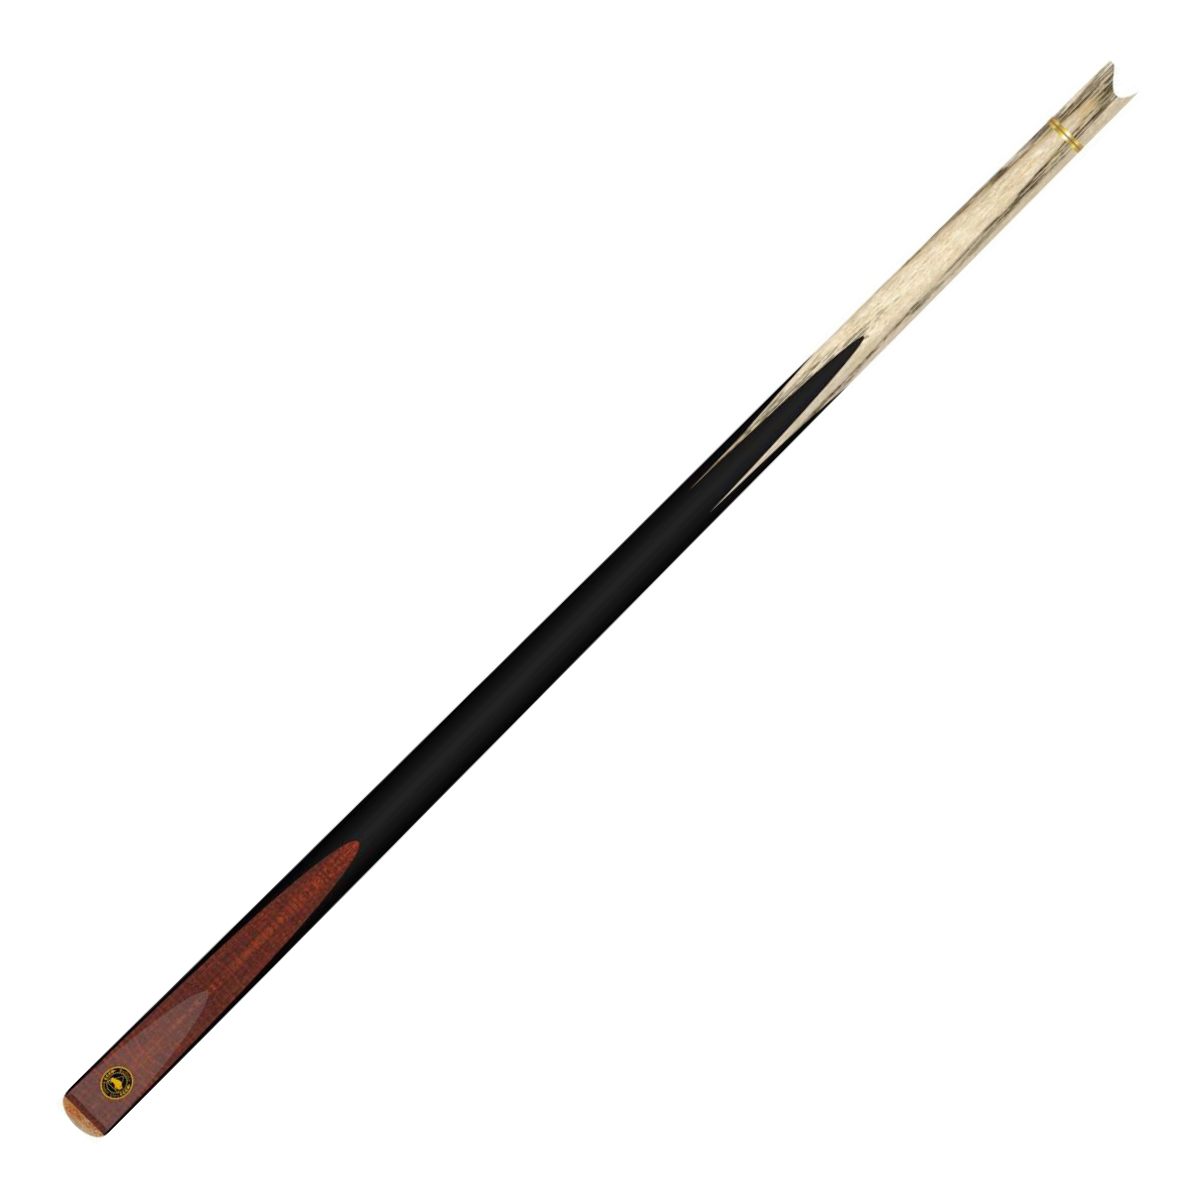 Buffalo Evans Centre Jointed British Pool Cue